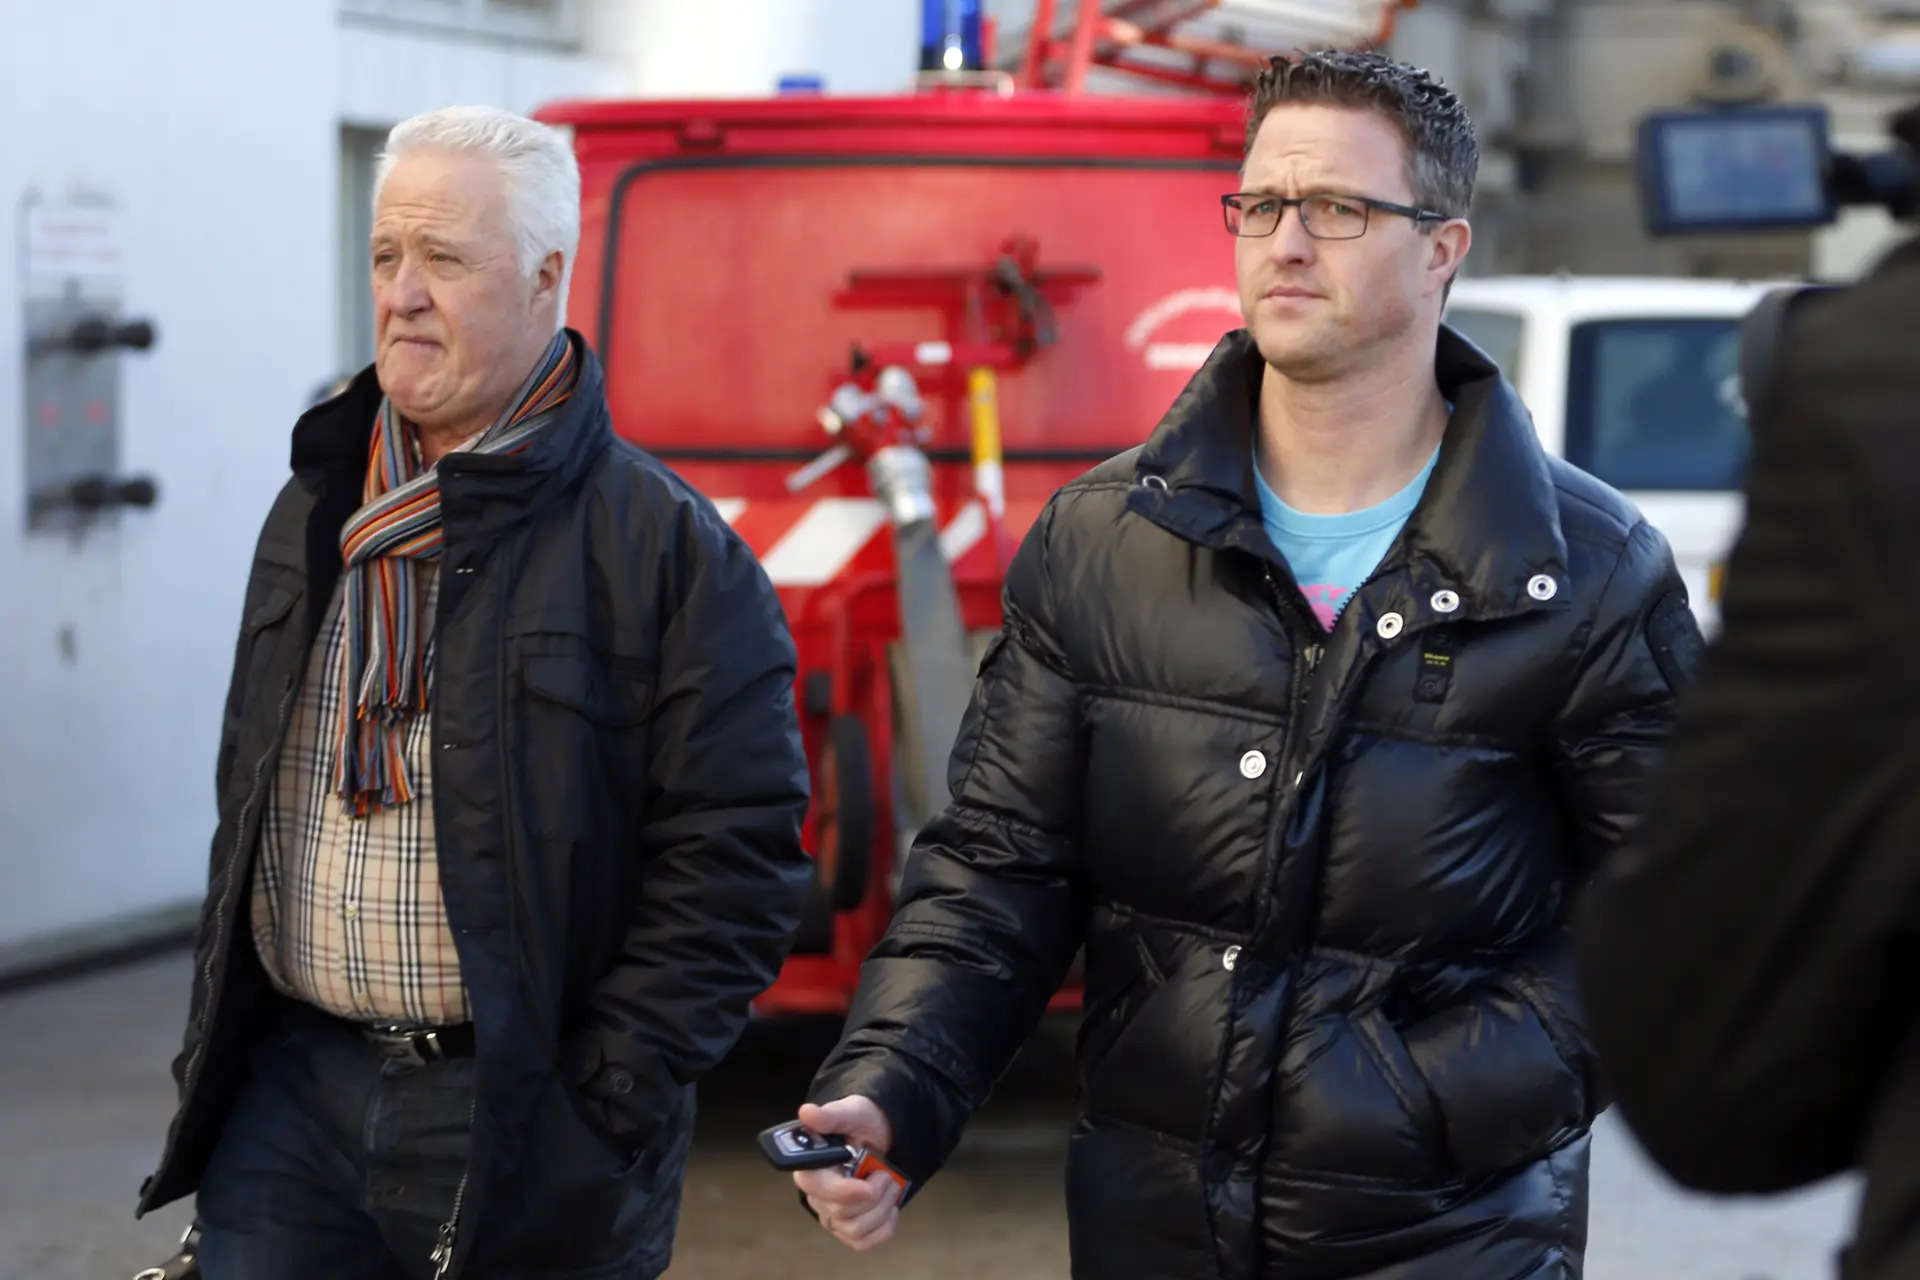 Michael Schumacher's brother comes out as gay in heart-touching post, all you need to know 